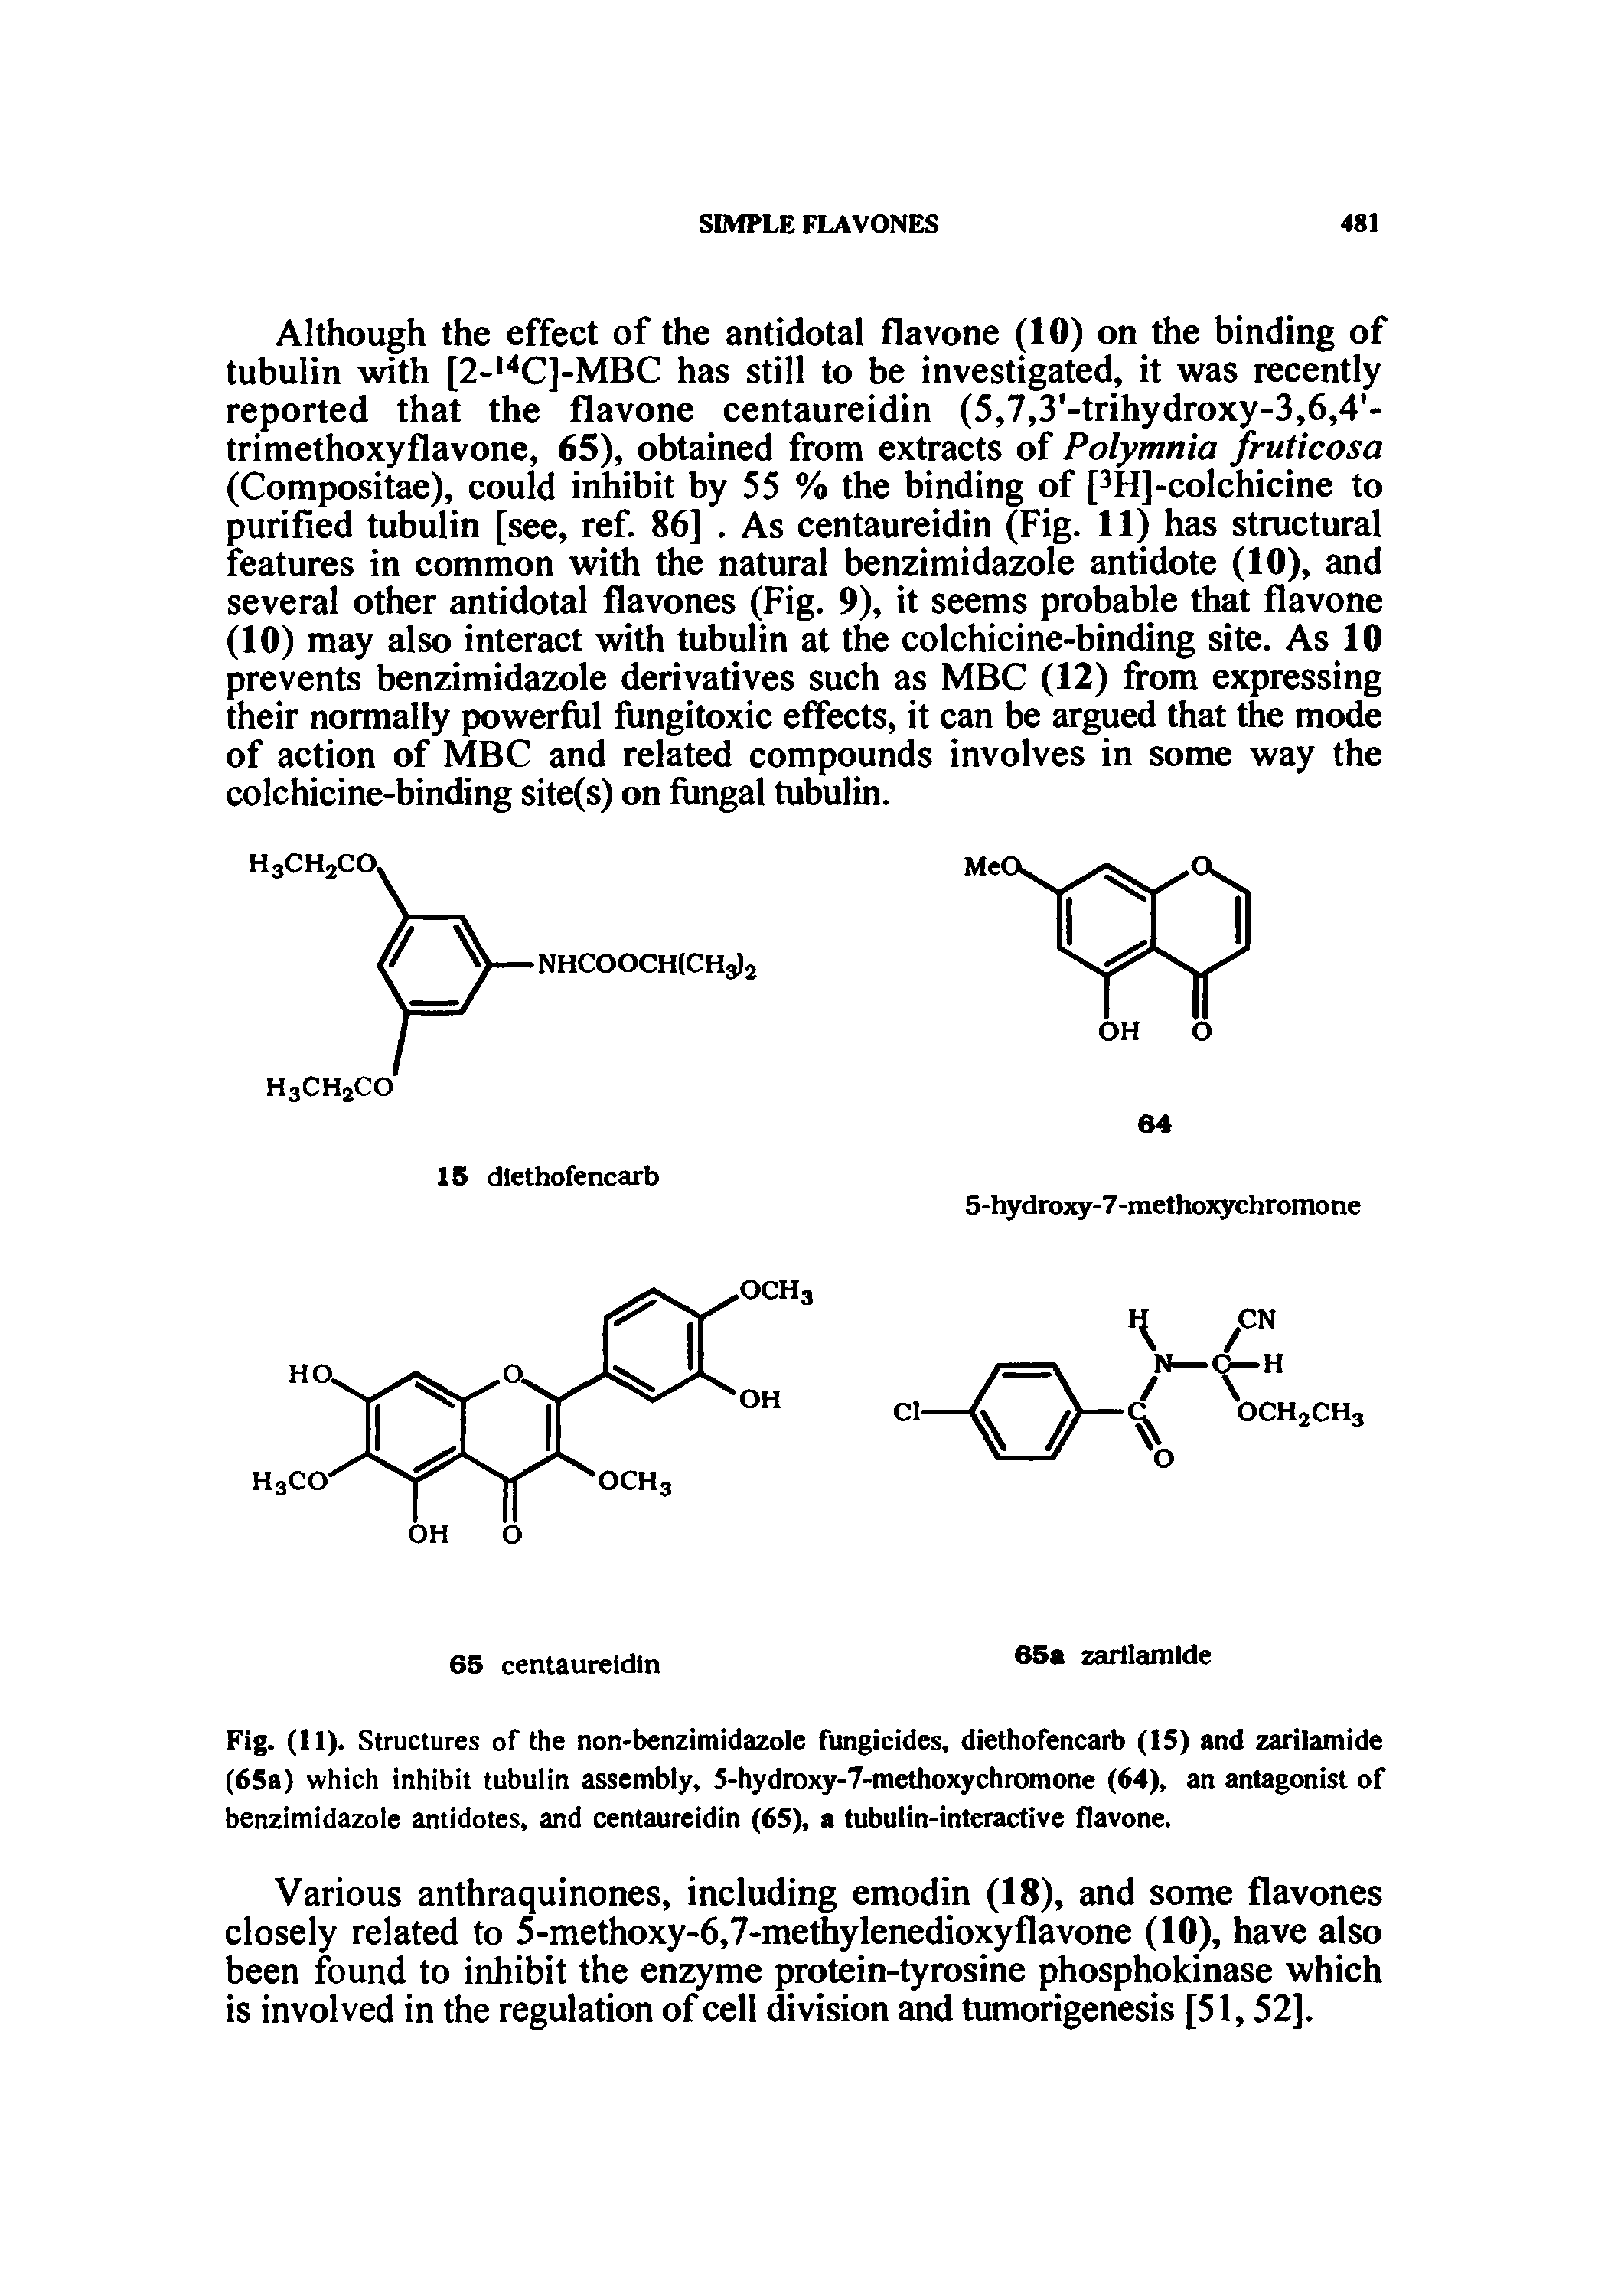 Fig. (11). Structures of the non-benzimidazole fungicides, diethofencarb (15) and zarilamide (65a) which inhibit tubulin assembly, 5-hydroxy-7-methoxychromone (64), an antagonist of benzimidazole antidotes, and centaureidin (65), a tubulin-interactive flavone.